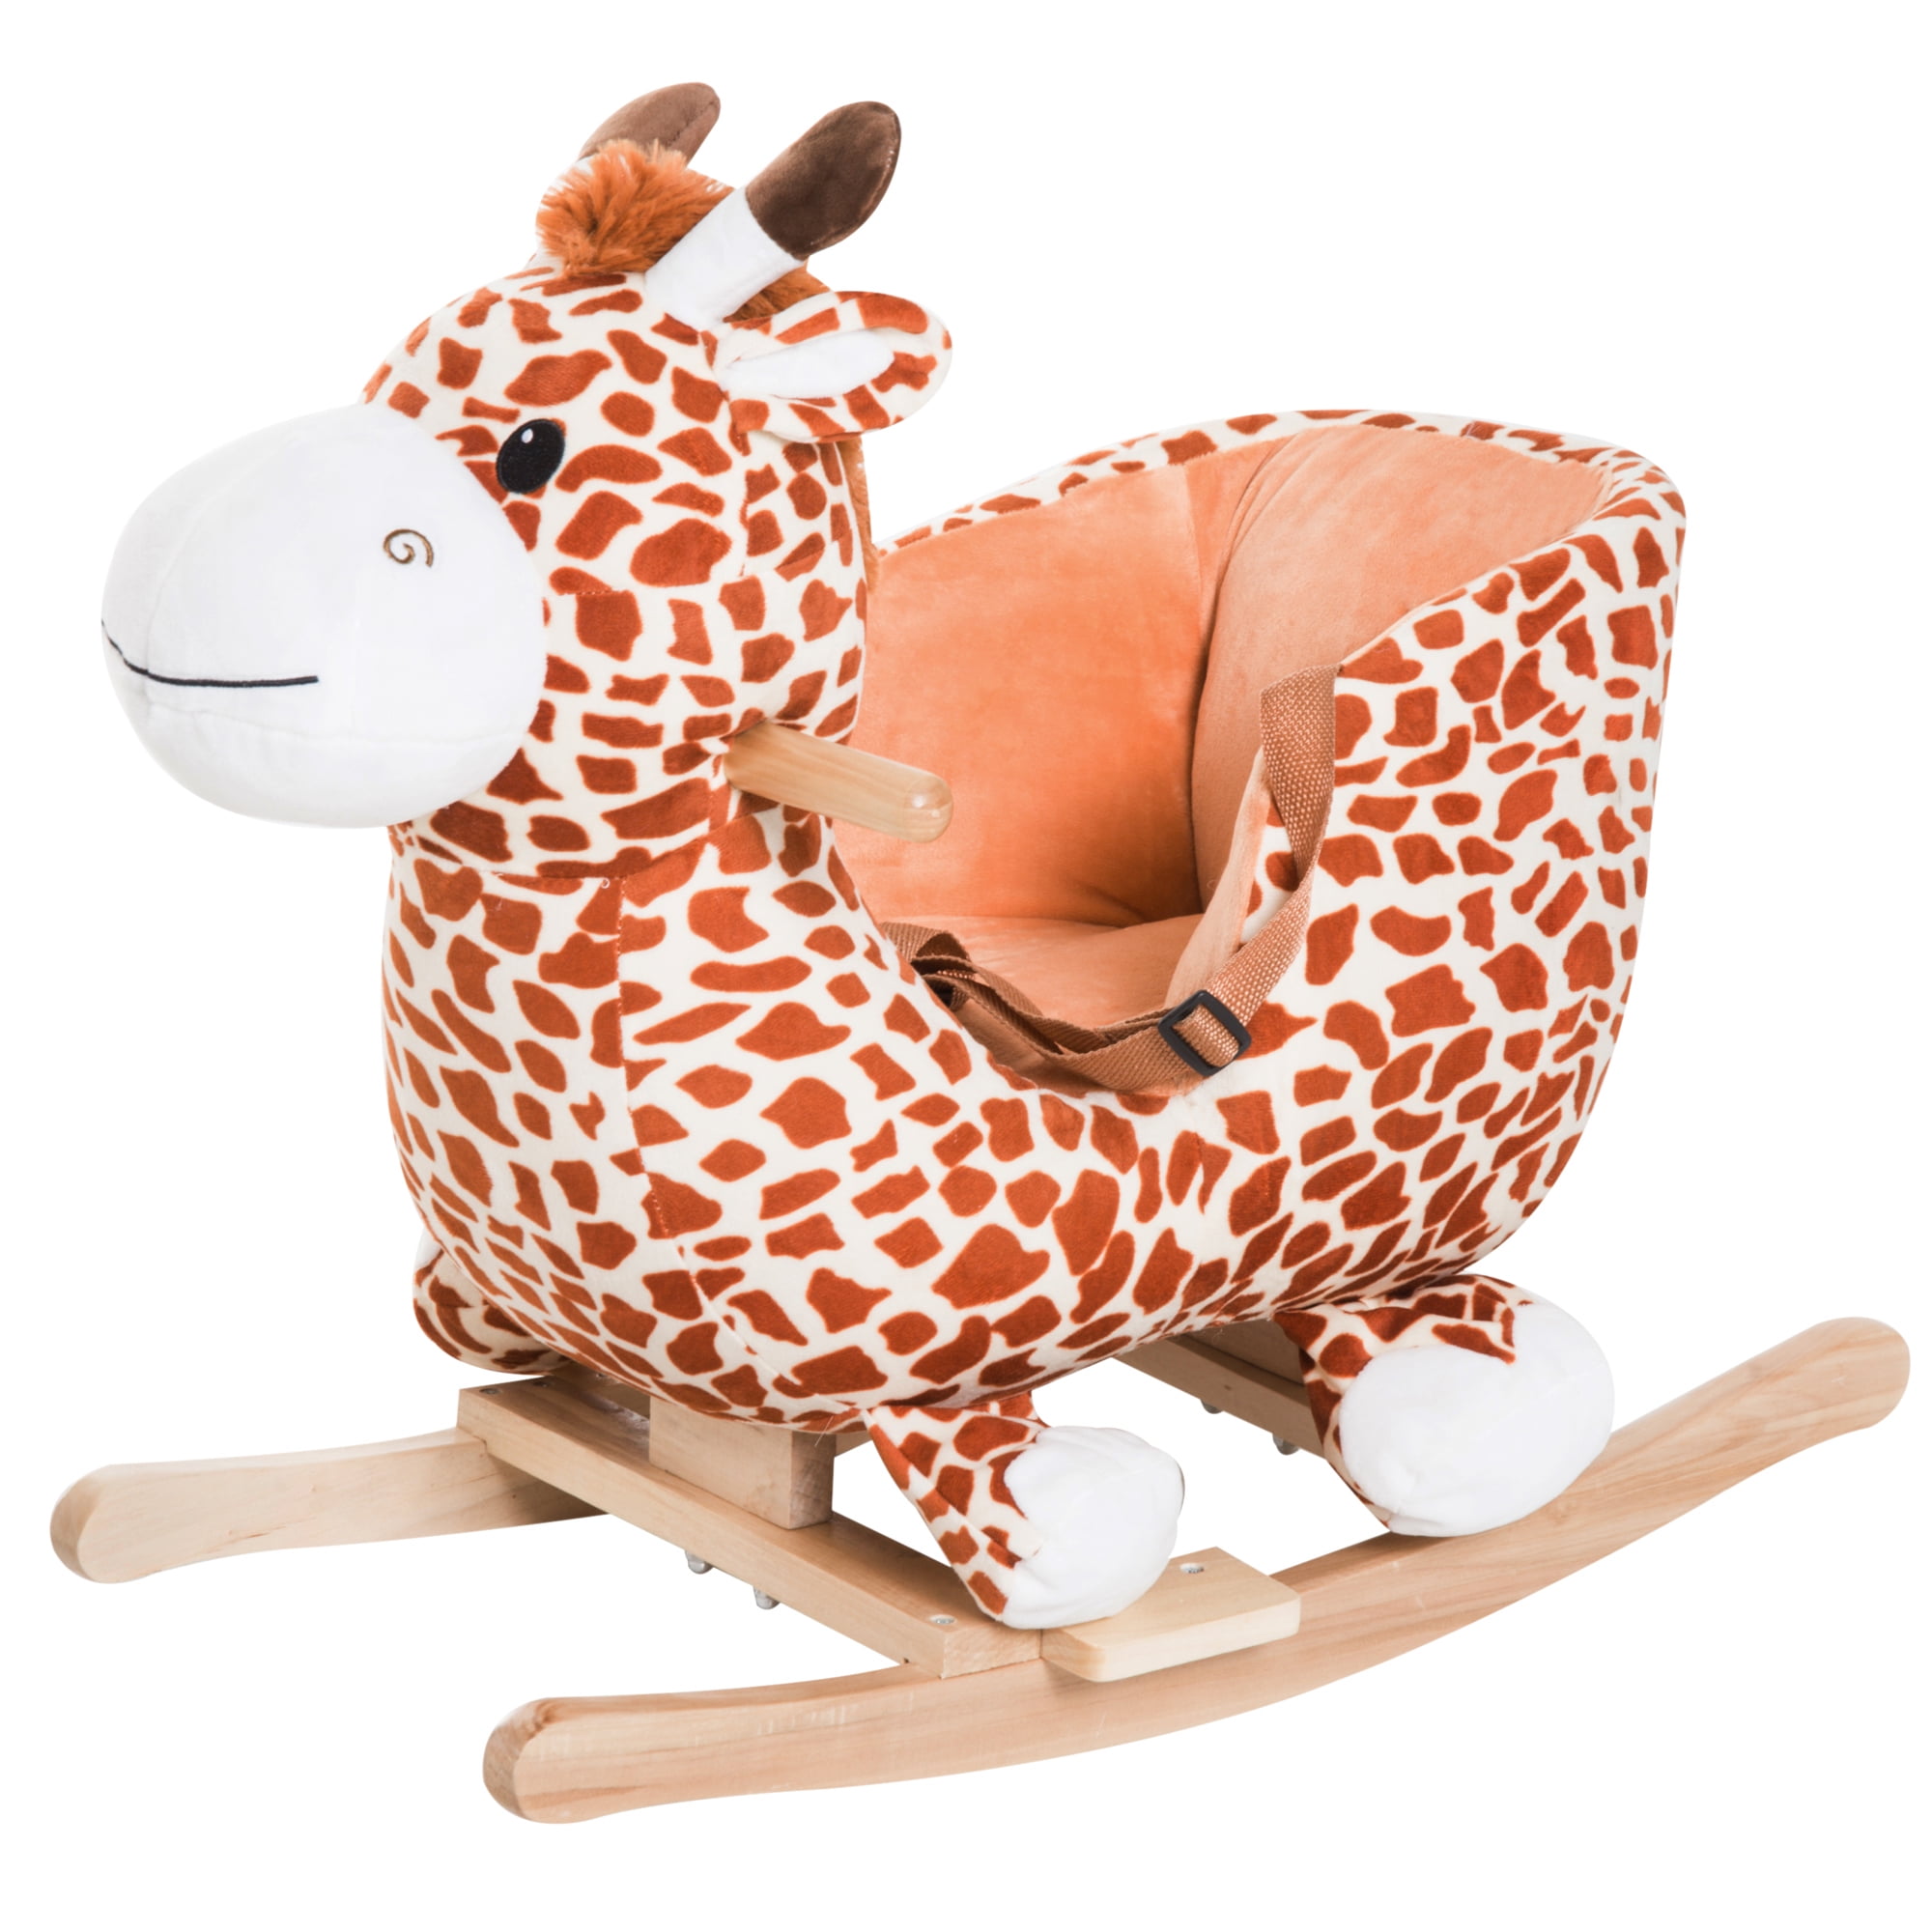 Qaba Kids Plush Ride on Rocking Horse Airplane Chair With Nursery Rhyme Sounds for sale online 